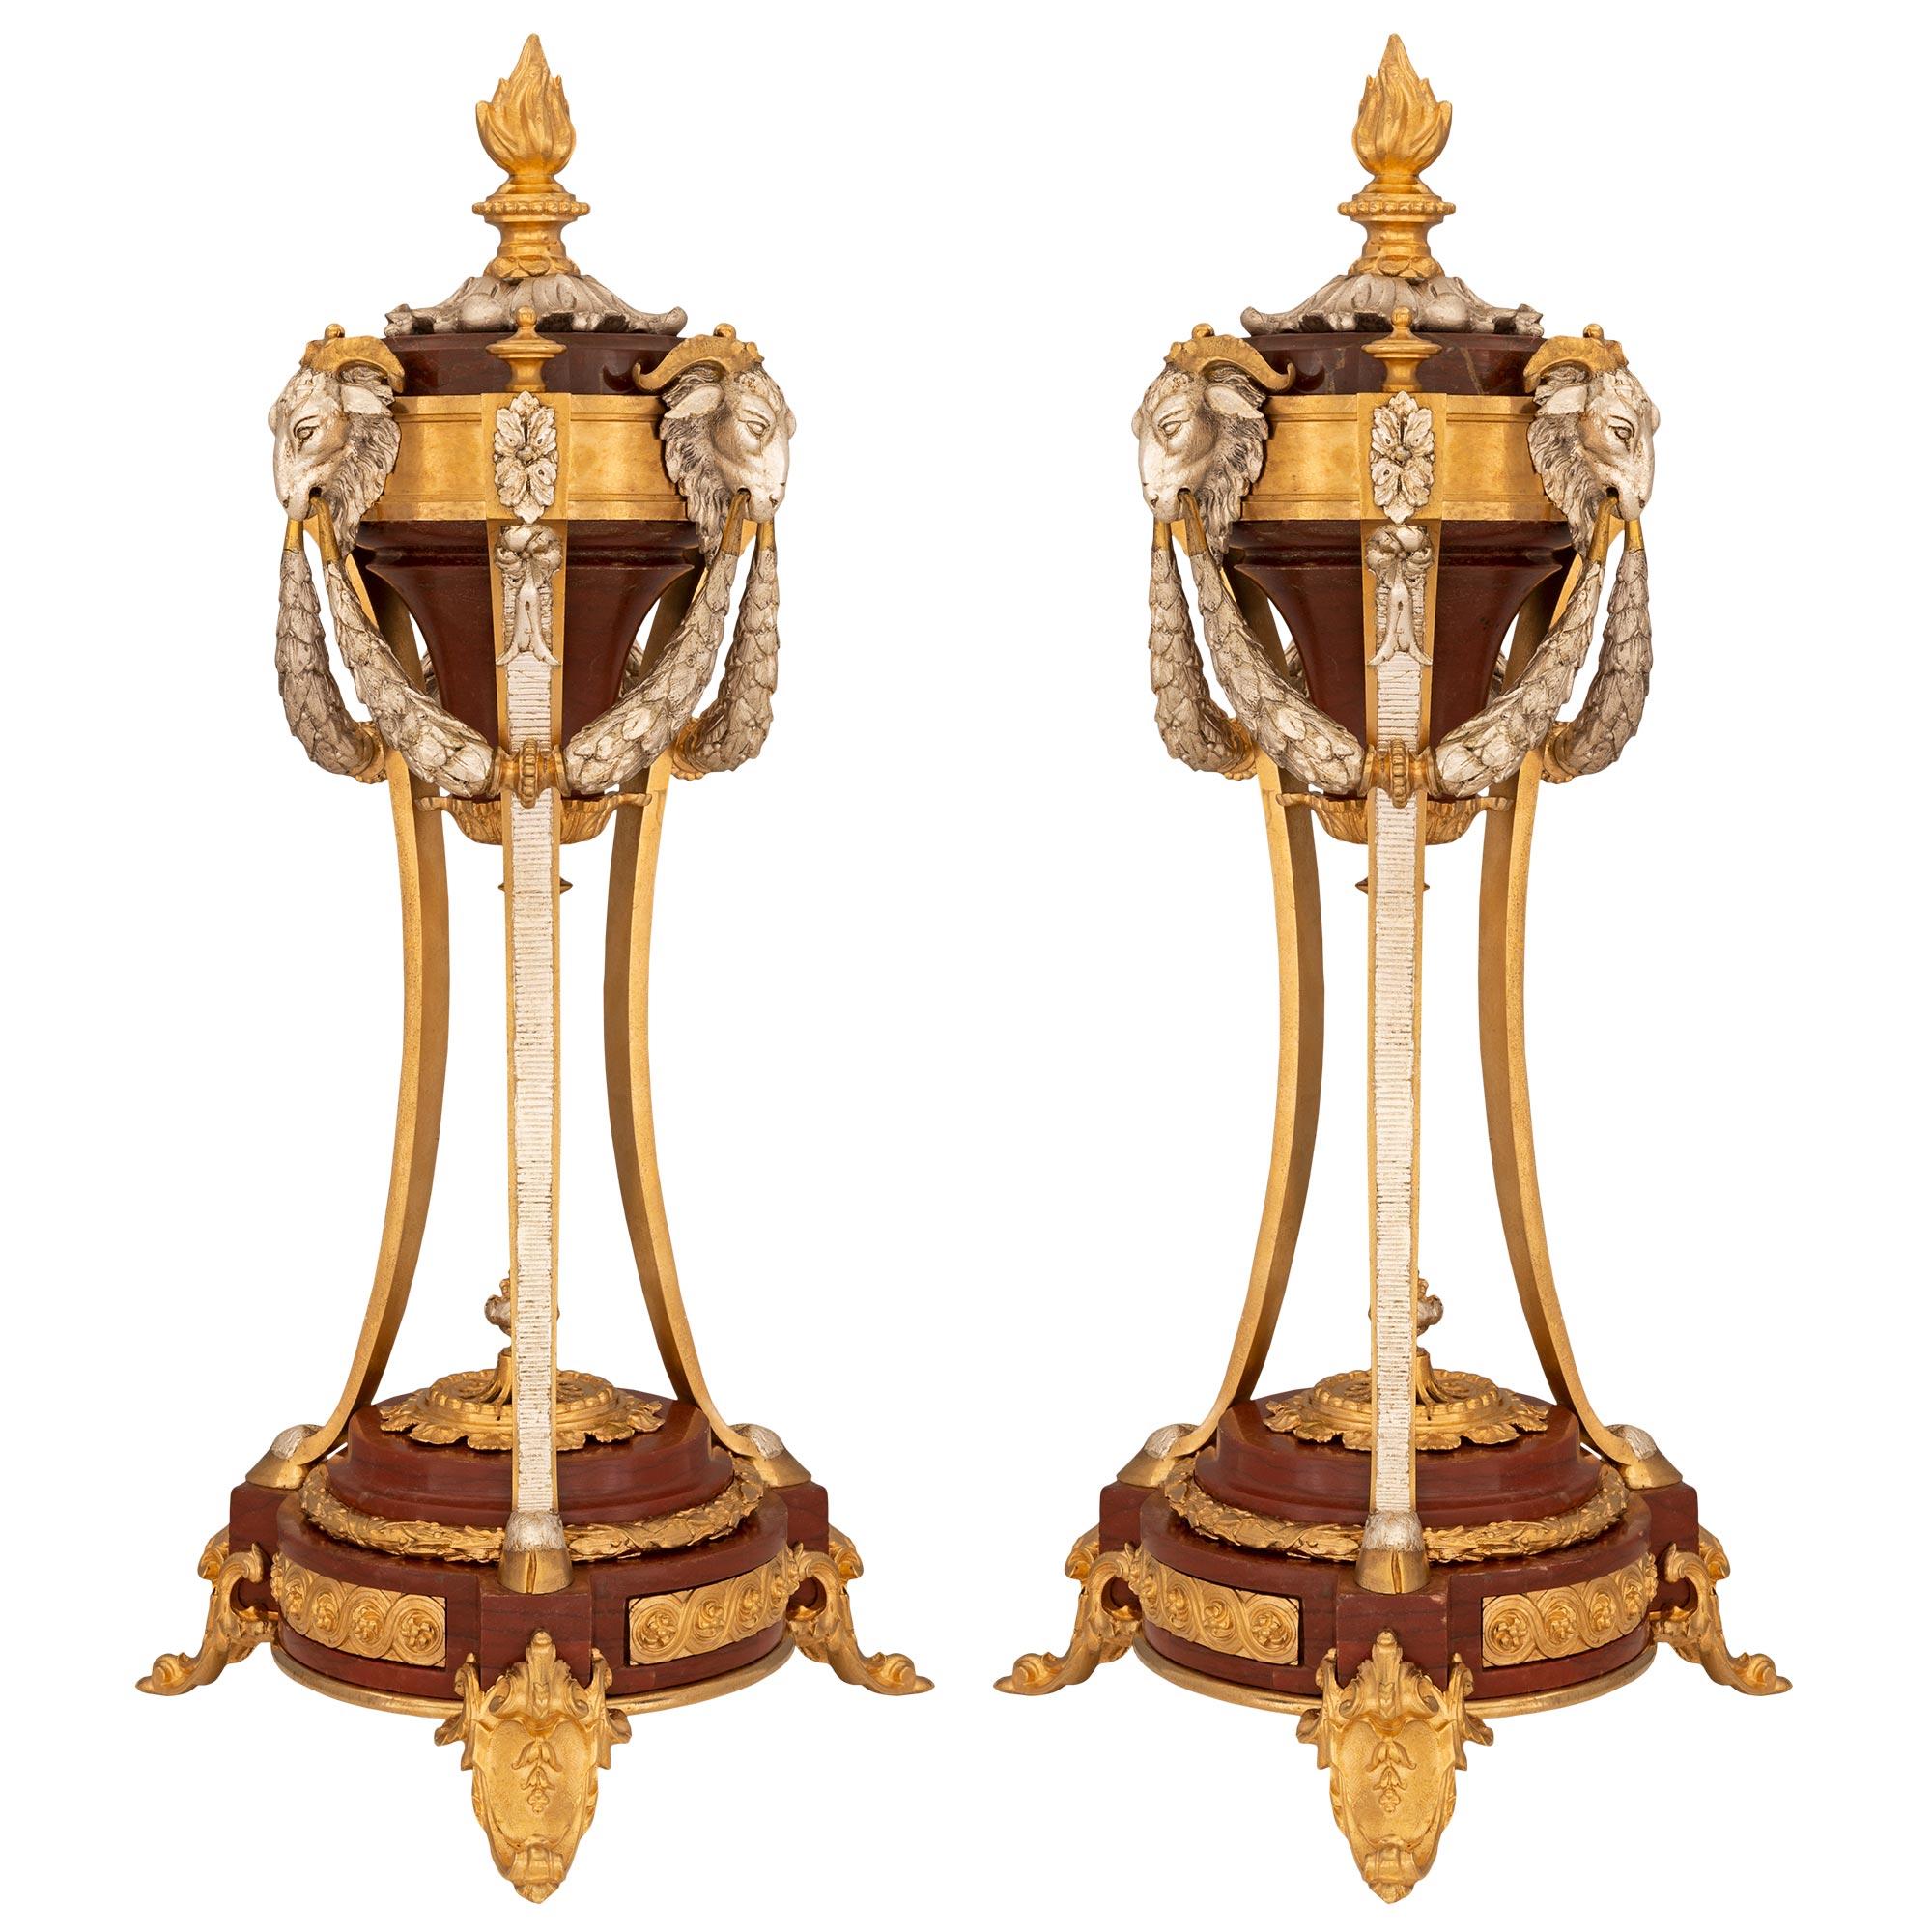 A stunning and extremely decorative pair of French 19th century Louis XVI st. Belle Époque period Rouge Griotte marble, ormolu and silvered bronze cassolettes. Each cassolette is raised by a striking Rouge Griotte marble base with superb finely